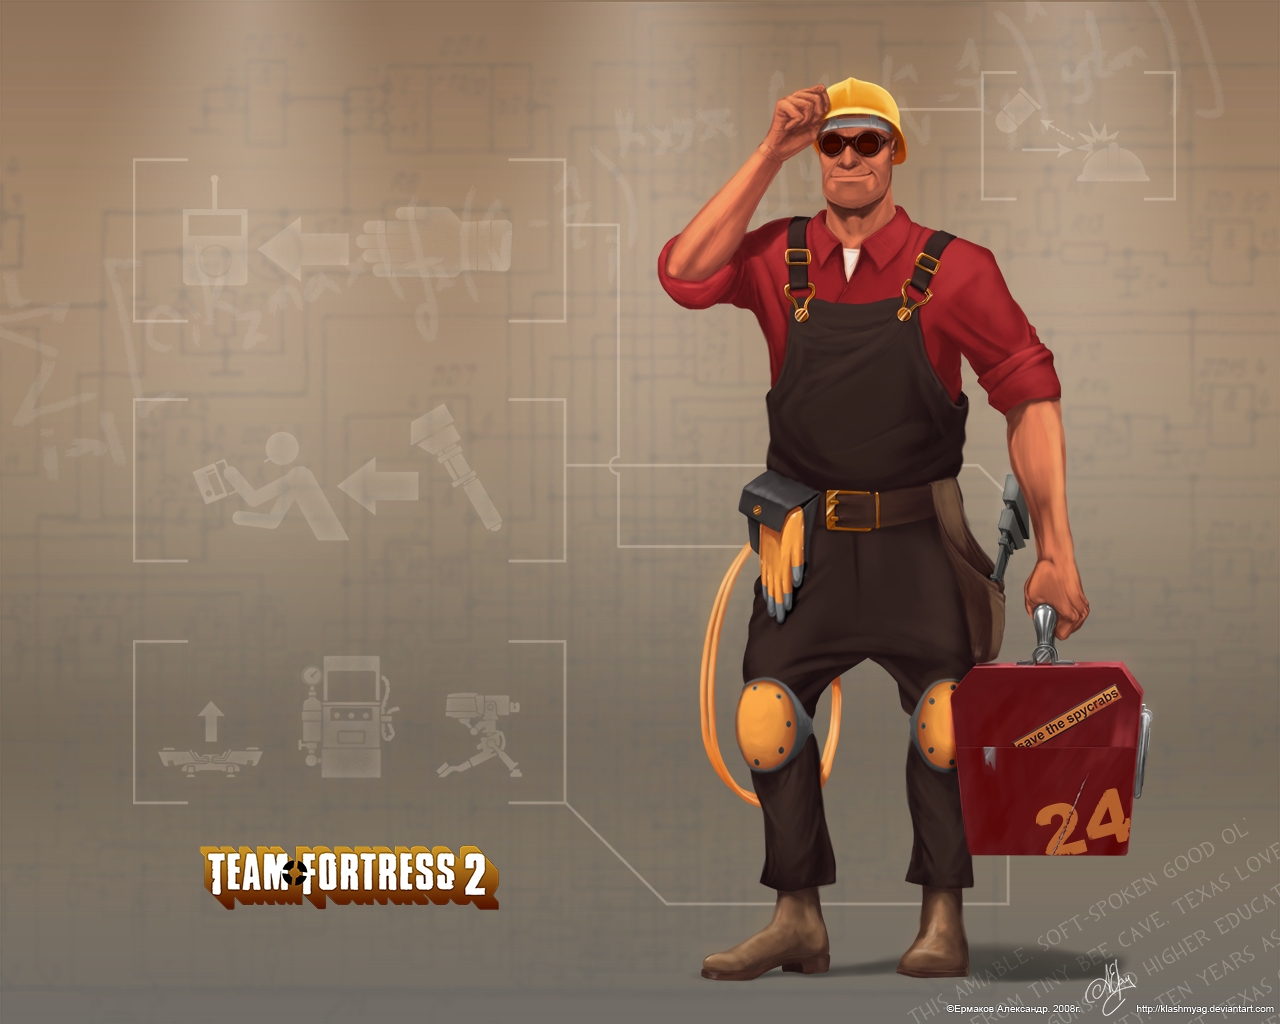 Of Truly Magnificent Tf2 Wallpaper Which You Will Hopefully Like